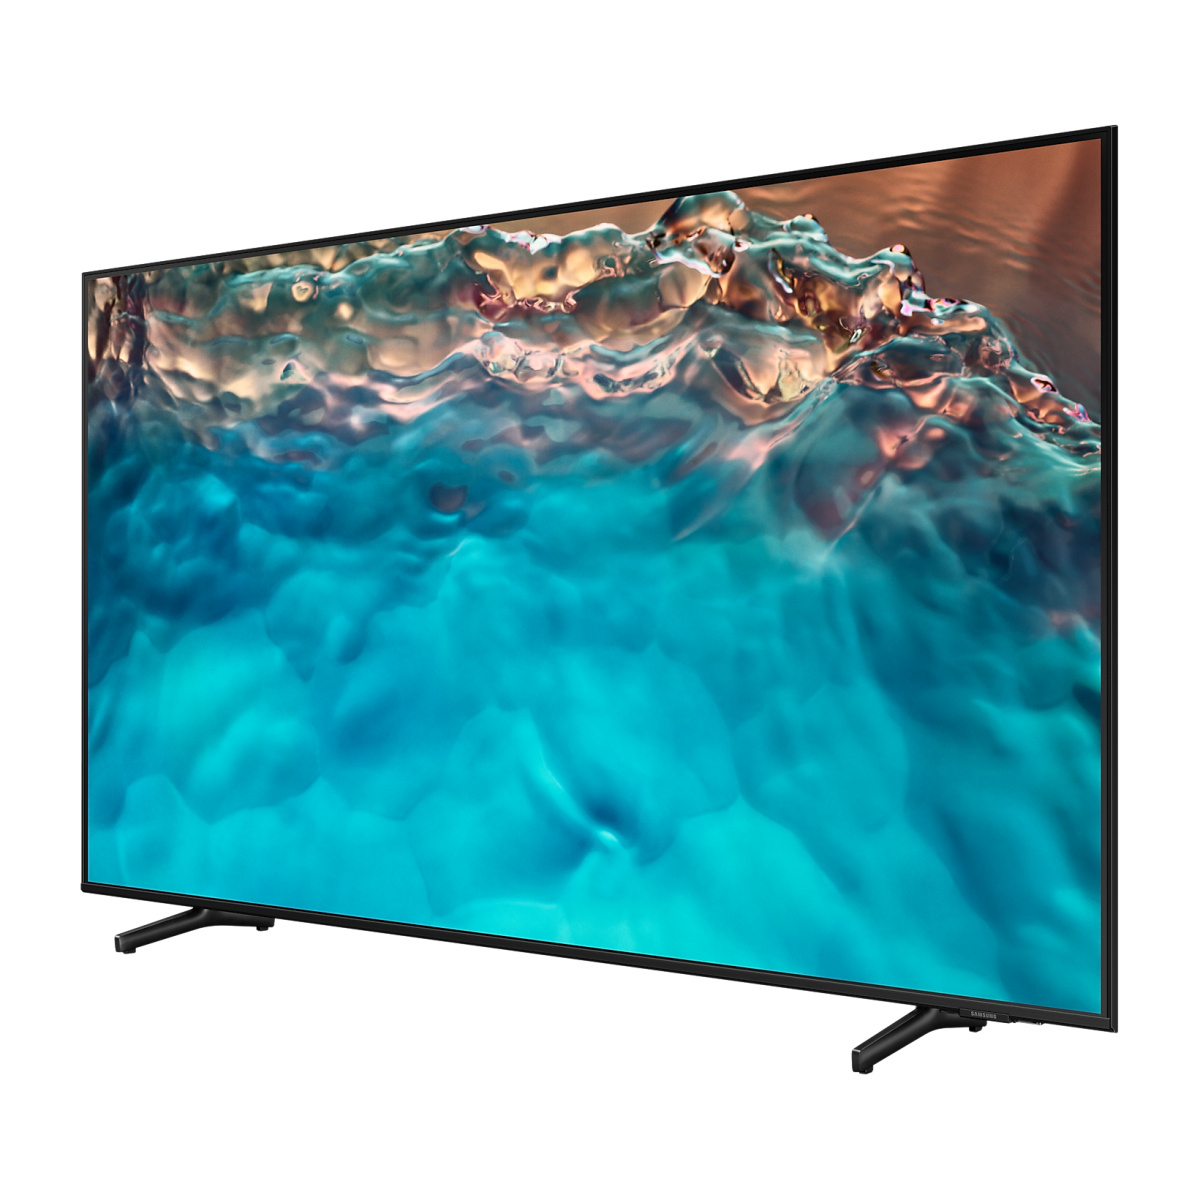 SAMSUNG 85" Crystal 4K Smart UHD TV UA85BU8000RSFS , Best TVs of Year, Top-rated TVs, TV Reviews, TV Comparison, Buying a TV Guide, TV Deals and Offers SAMSUNG 75" Crystal 4K Smart UHD TV UA75BU8000RSFS , Best TVs of Year, Top-rated TVs, TV Reviews, TV Comparison, Buying a TV Guide, TV Deals and Offers SAMSUNG 65" Crystal 4K Smart UHD TV UA65BU8000RSFS , Best TVs of Year, Top-rated TVs, TV Reviews, TV Comparison, Buying a TV Guide, TV Deals and Offers SAMSUNG 50" Crystal 4K Smart UHD TV UA50BU8000RSFS , Best TVs of Year, Top-rated TVs, TV Reviews, TV Comparison, Buying a TV Guide, TV Deals and Offers Best TVs of Year, Top-rated TVs, TV Reviews, TV Comparison, Buying a TV Guide, TV Deals and Offers Best TV in Chittagong, Best selling TV in Chittagong, Best Electronics Store in Chittagong, Meem Electronics, MeemElectronics, Best Deal of TV, SAMSUNG TV price in Bangladersh, SAMSUNG TV price in Chittagong, SAMSUNG TV price in CTG, 85 Inch TV, SAMSUNG TV, 01919382008, 01919382009, 019193820010 Best TVs of Year, Top-rated TVs, TV Reviews, TV Comparison, Buying a TV Guide, TV Deals and Offers Best TV in Chittagong, Best selling TV in Chittagong, Best Electronics Store in Chittagong, Meem Electronics, MeemElectronics, Best Deal of TV, SAMSUNG TV price in Bangladersh, SAMSUNG TV price in Chittagong, SAMSUNG TV price in CTG, 75 Inch TV, SAMSUNG TV, 01919382008, 01919382009, 019193820010 Best TVs of Year, Top-rated TVs, TV Reviews, TV Comparison, Buying a TV Guide, TV Deals and Offers Best TV in Chittagong, Best selling TV in Chittagong, Best Electronics Store in Chittagong, Meem Electronics, MeemElectronics, Best Deal of TV, SAMSUNG TV price in Bangladersh, SAMSUNG TV price in Chittagong, SAMSUNG TV price in CTG, 65 Inch TV, SAMSUNG TV, 01919382008, 01919382009, 019193820010 SAMSUNG 55" Crystal 4K Smart UHD TV UA55BU8000RSFS , Best TVs of Year, Top-rated TVs, TV Reviews, TV Comparison, Buying a TV Guide, TV Deals and Offers Best TV in Chittagong, Best selling TV in Chittagong, Best Electronics Store in Chittagong, Meem Electronics, MeemElectronics, Best Deal of TV, SAMSUNG TV price in Bangladersh, SAMSUNG TV price in Chittagong, SAMSUNG TV price in CTG, 65 Inch TV, SAMSUNG TV, 01919382008, 01919382009, 019193820010 55 Inch TV, SAMSUNG 50" Crystal 4K Smart UHD TV UA50BU8000RSFS , Best TVs of Year, Top-rated TVs, TV Reviews, TV Comparison, Buying a TV Guide, TV Deals and Offers Best TV in Chittagong, Best selling TV in Chittagong, Best Electronics Store in Chittagong, Meem Electronics, MeemElectronics, Best Deal of TV, SAMSUNG TV price in Bangladersh, SAMSUNG TV price in Chittagong, SAMSUNG TV price in CTG, 50 Inch TV, SAMSUNG TV, 01919382008, 01919382009, 019193820010 SAMSUNG 43" Crystal 4K Smart UHD TV UA43BU8000RSFS , Best TVs of Year, Top-rated TVs, TV Reviews, TV Comparison, Buying a TV Guide, TV Deals and Offers Best TV in Chittagong, Best selling TV in Chittagong, Best Electronics Store in Chittagong, Meem Electronics, MeemElectronics, Best Deal of TV, SAMSUNG TV price in Bangladersh, SAMSUNG TV price in Chittagong, SAMSUNG TV price in CTG, 43 Inch TV, SAMSUNG TV, 01919382008, 01919382009, 019193820010